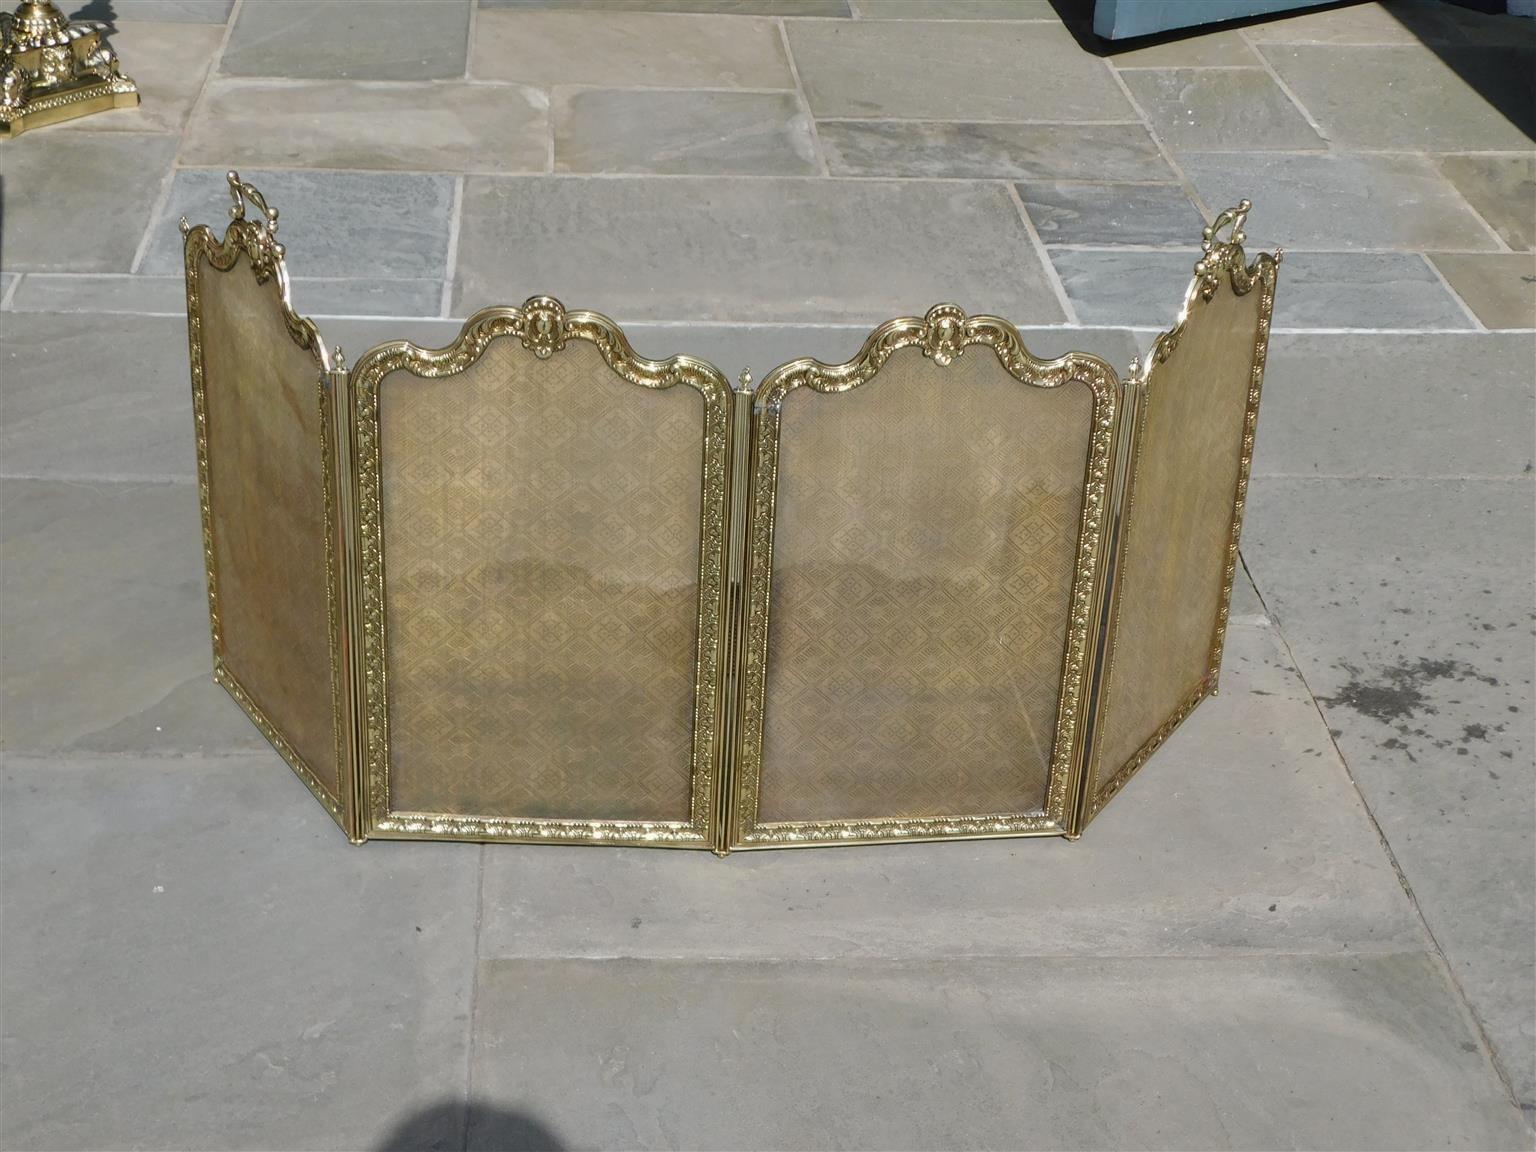 French Brass serpentine four panel folding fire place screen with decorative beaded foliage medallions, engraved ball finials, and flanking side handles. Early 19th century.